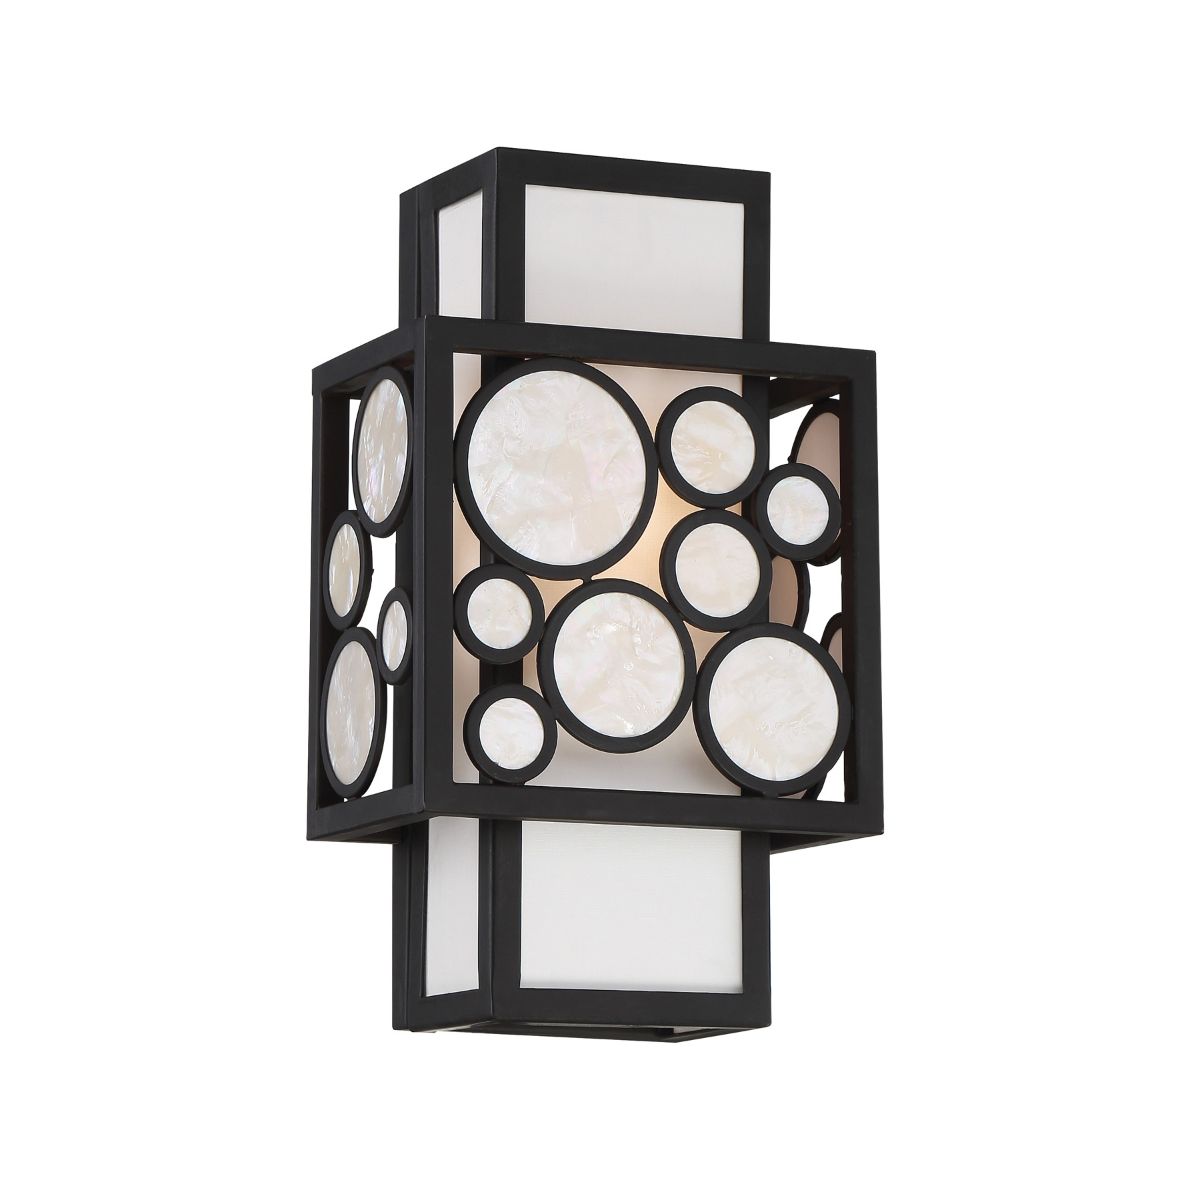 Mosaic 14 in. Flush Mount Sconce Oil Rubbed Bronze finish